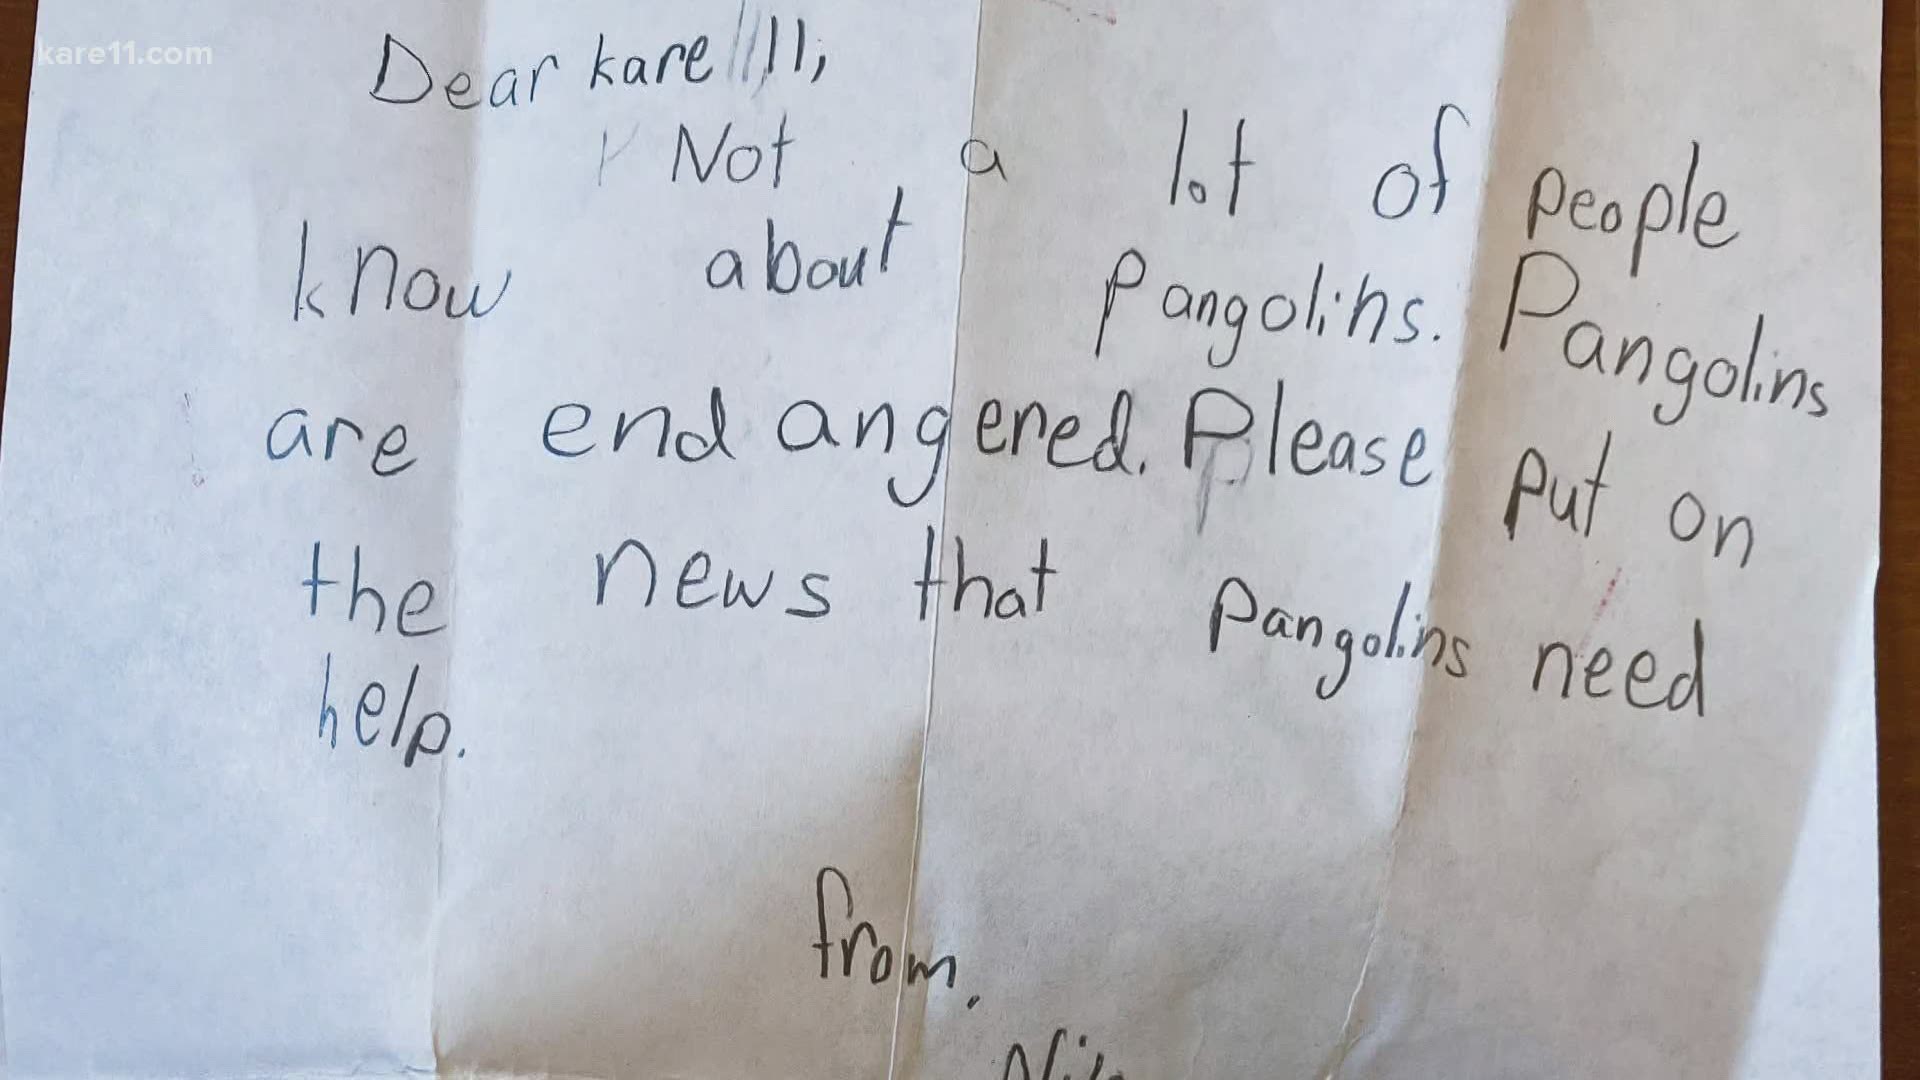 She wants everyone to know Pangolin's need help and so, we felt it would be best to get Nilo a letter back and pay her a visit.